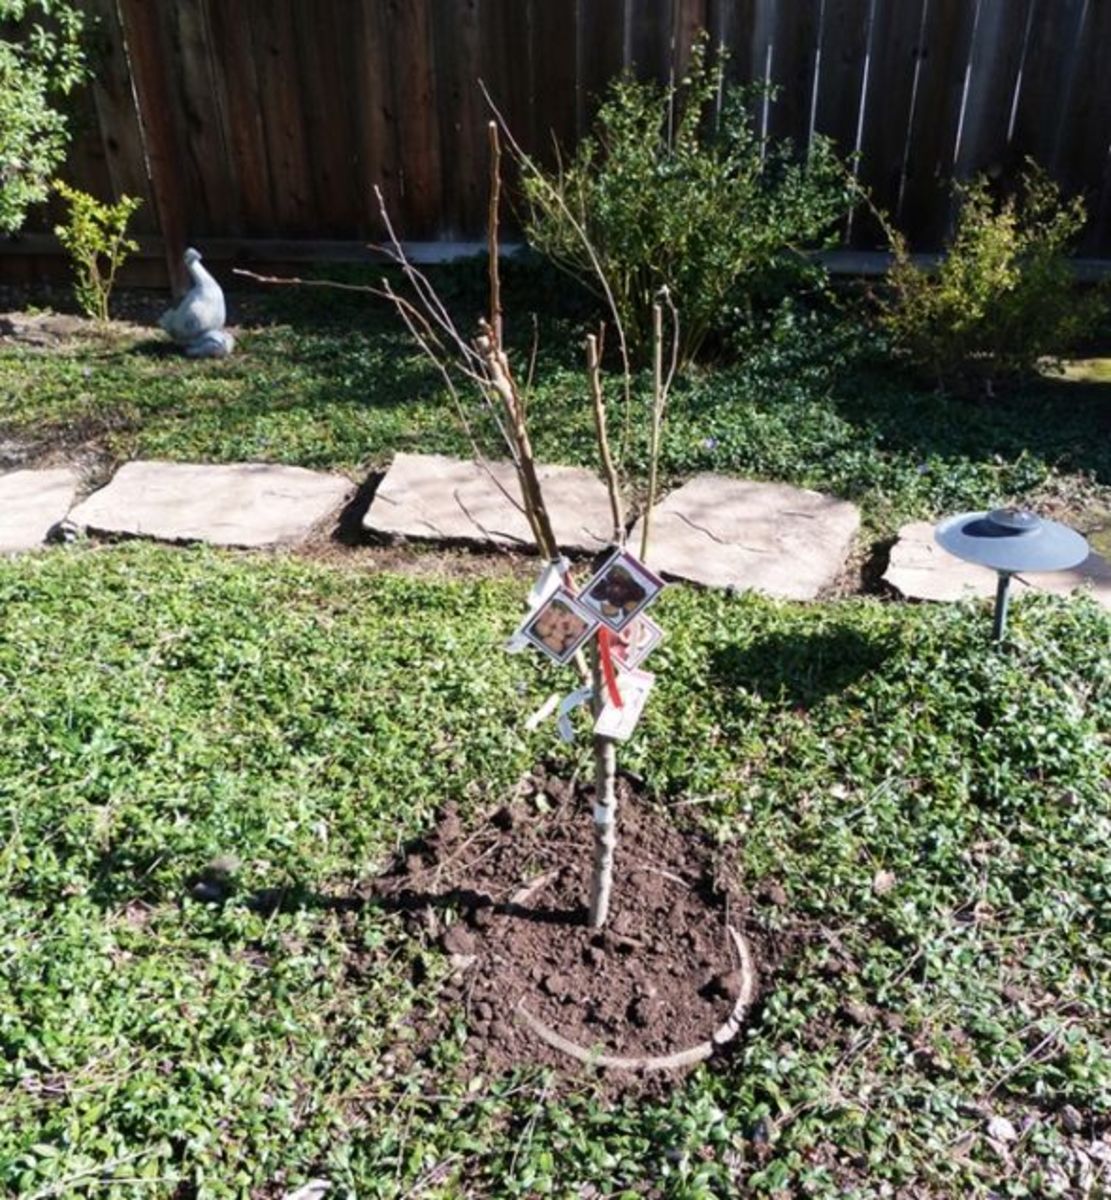 Spring, Feb. 12, 2012: the arrival of the 4-in-1 fruit salad tree.